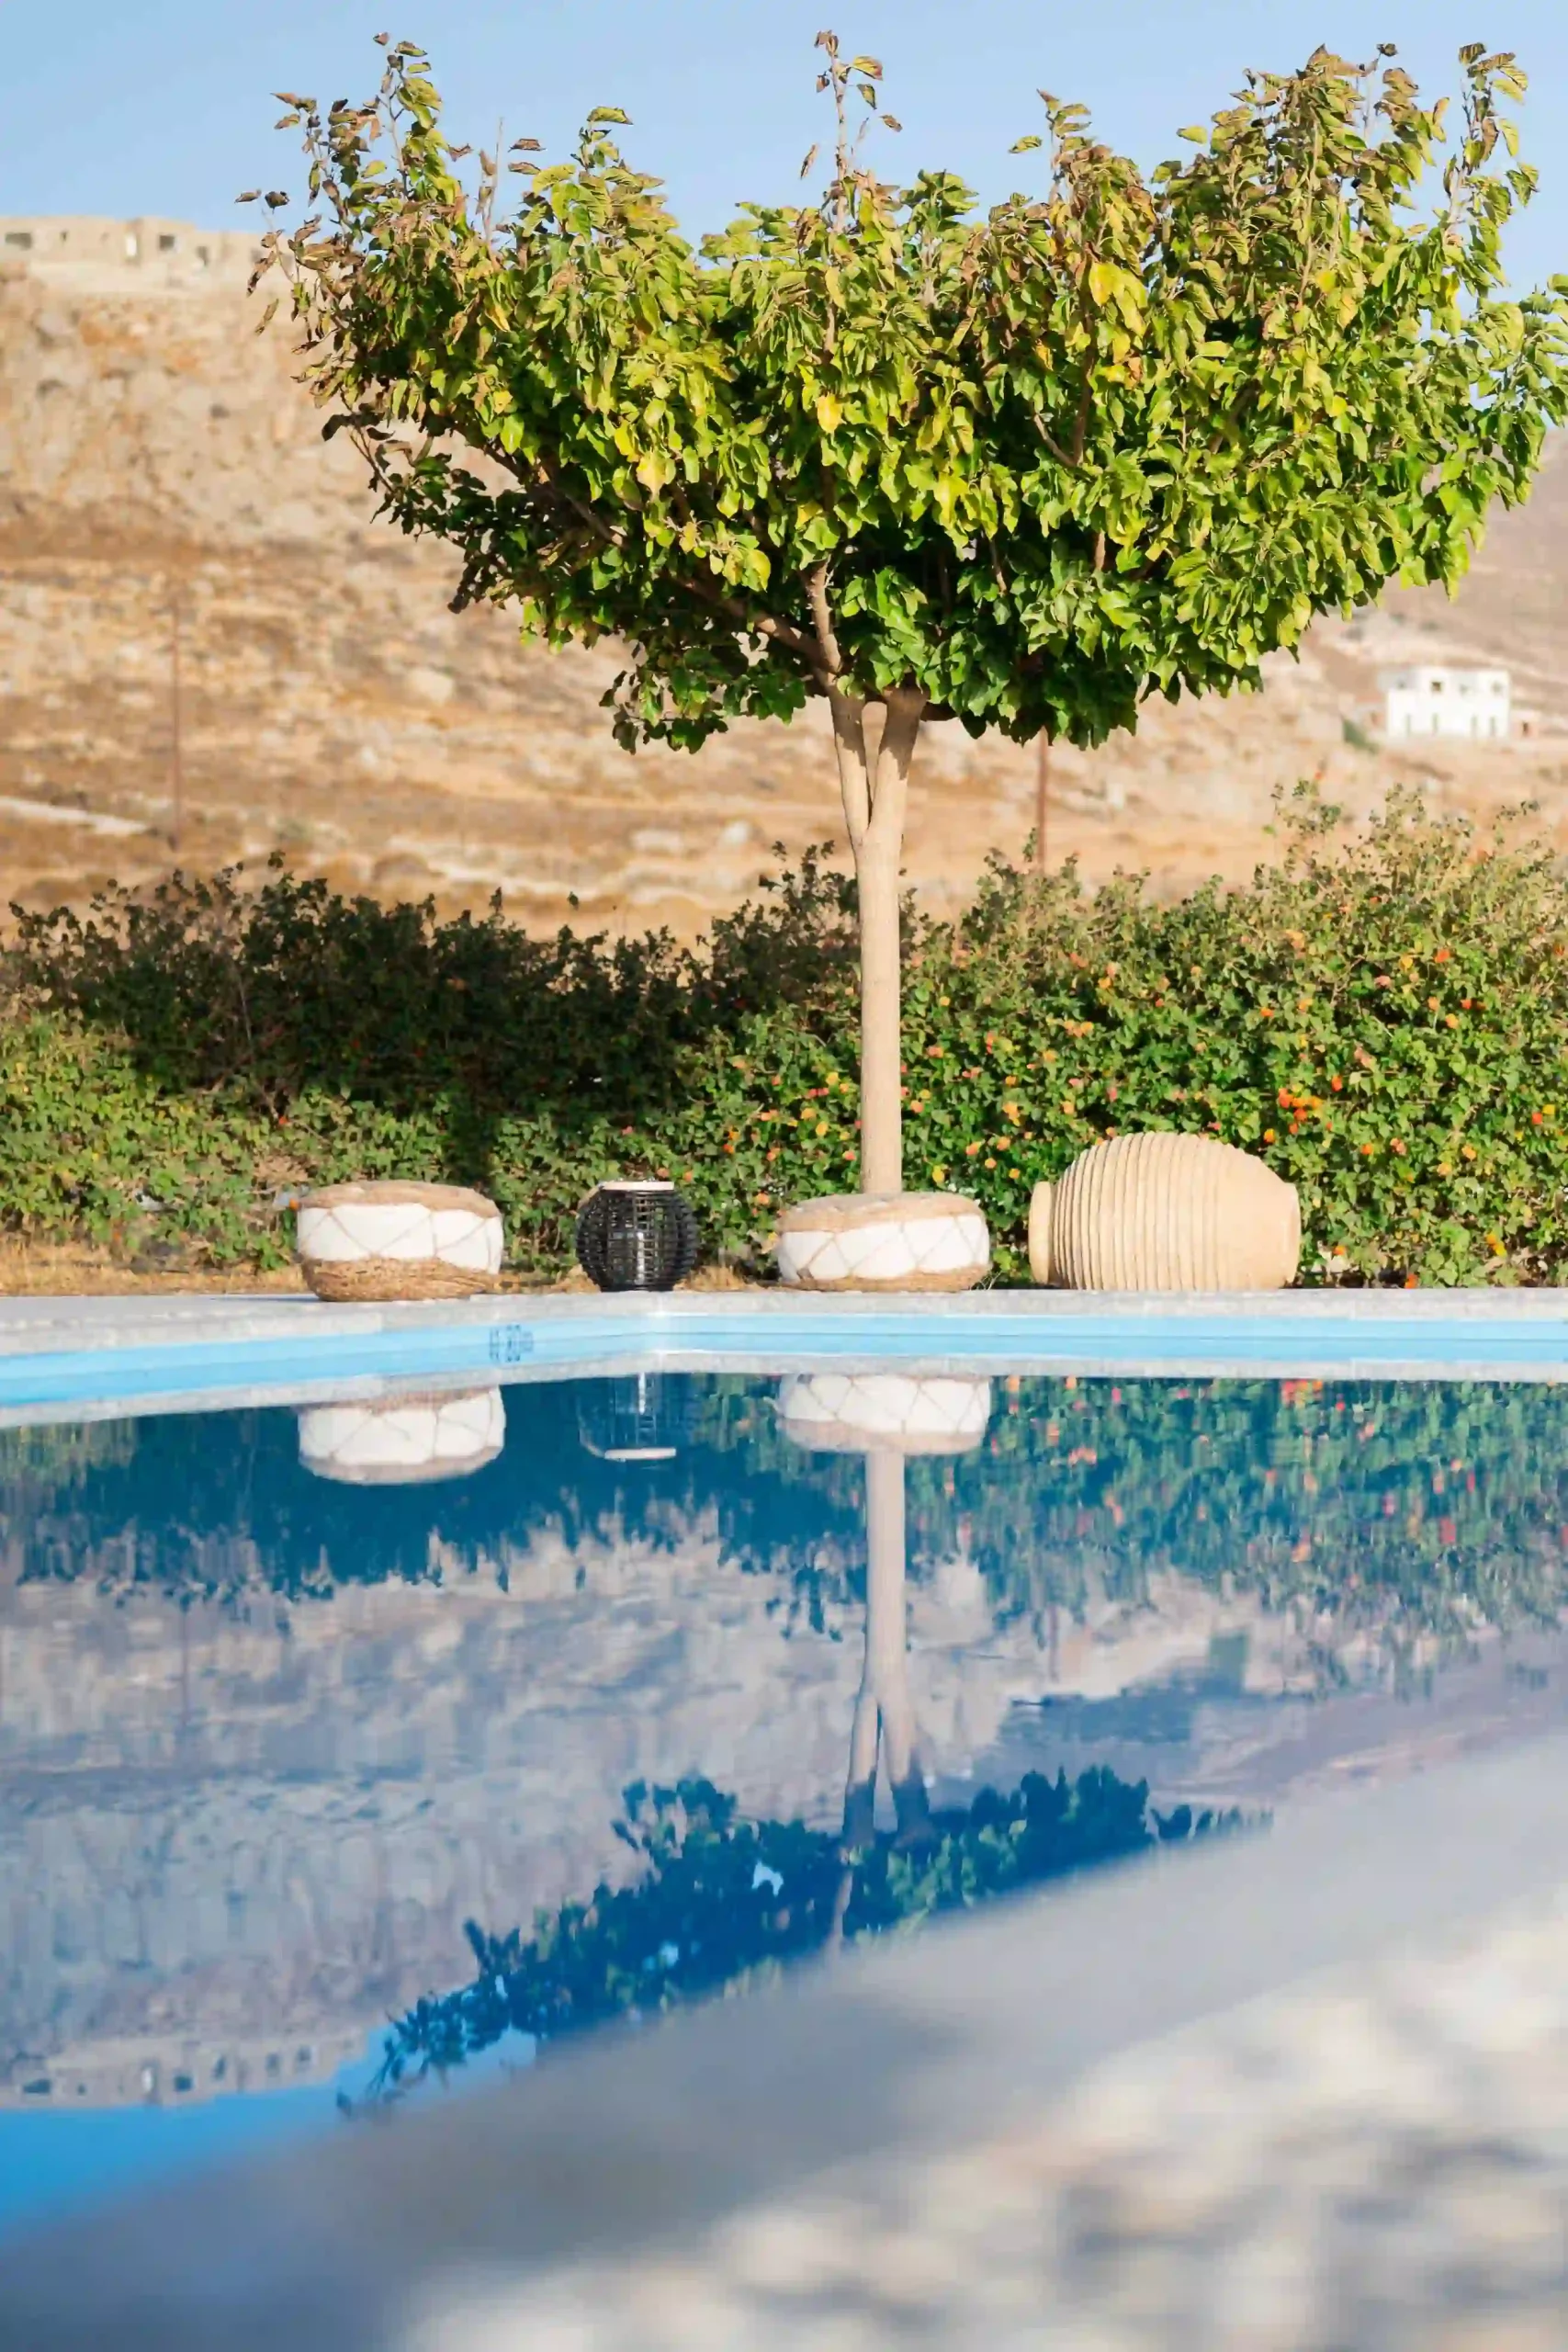 orange tree reflected on the private pool